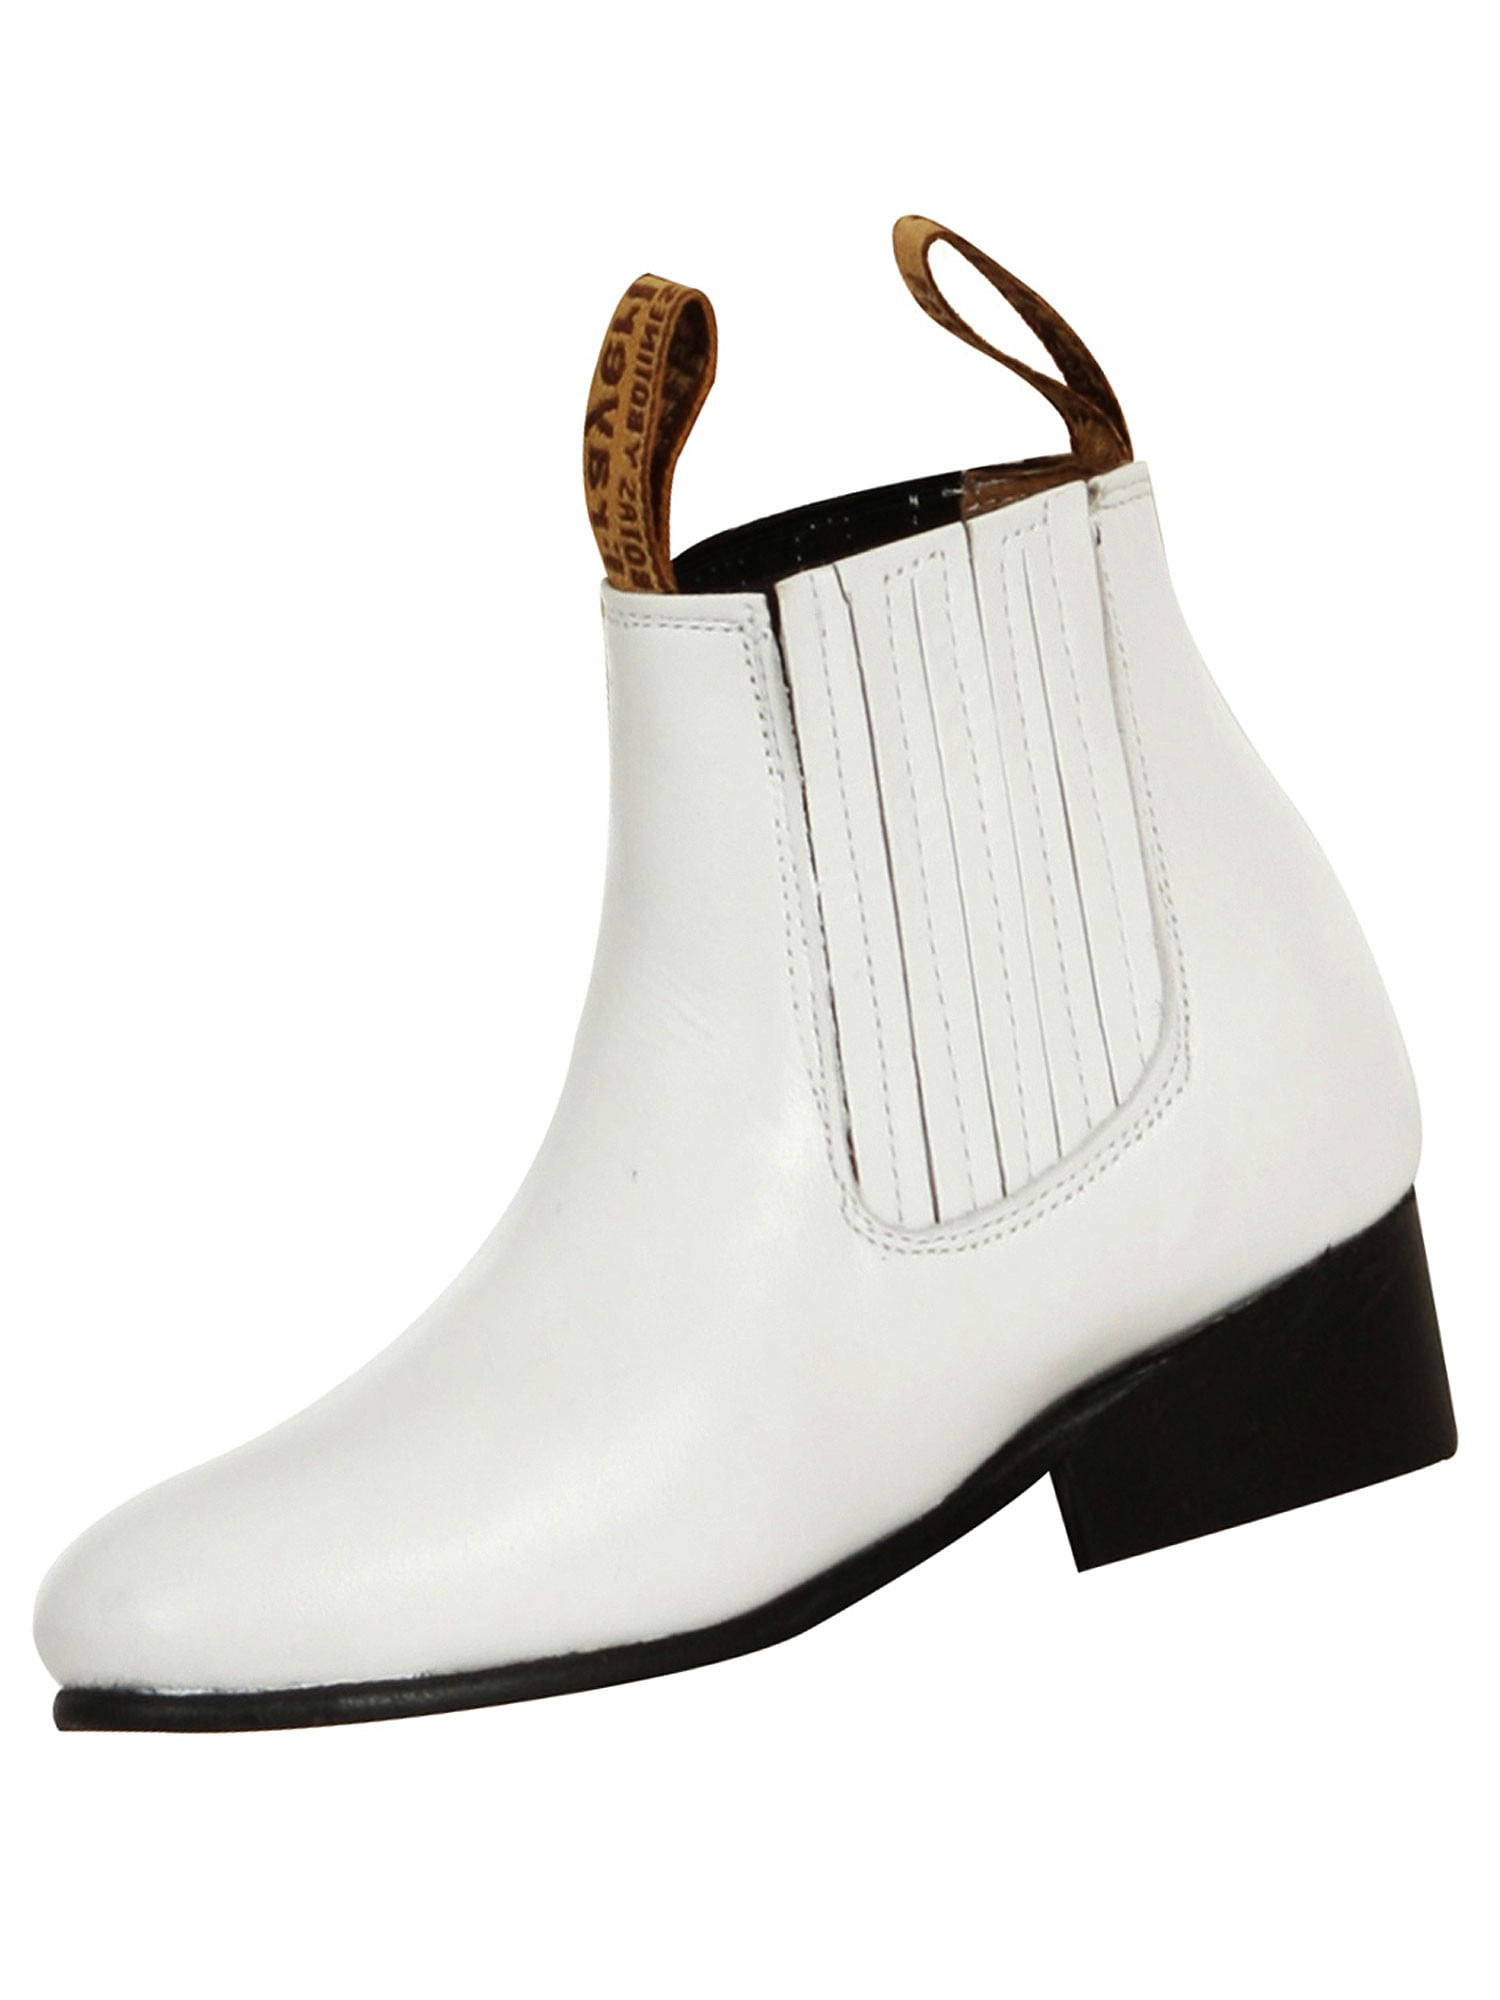 Rain Kids Toddler Boys White Stretch Side Low Heel Ankle Boot 5-11 